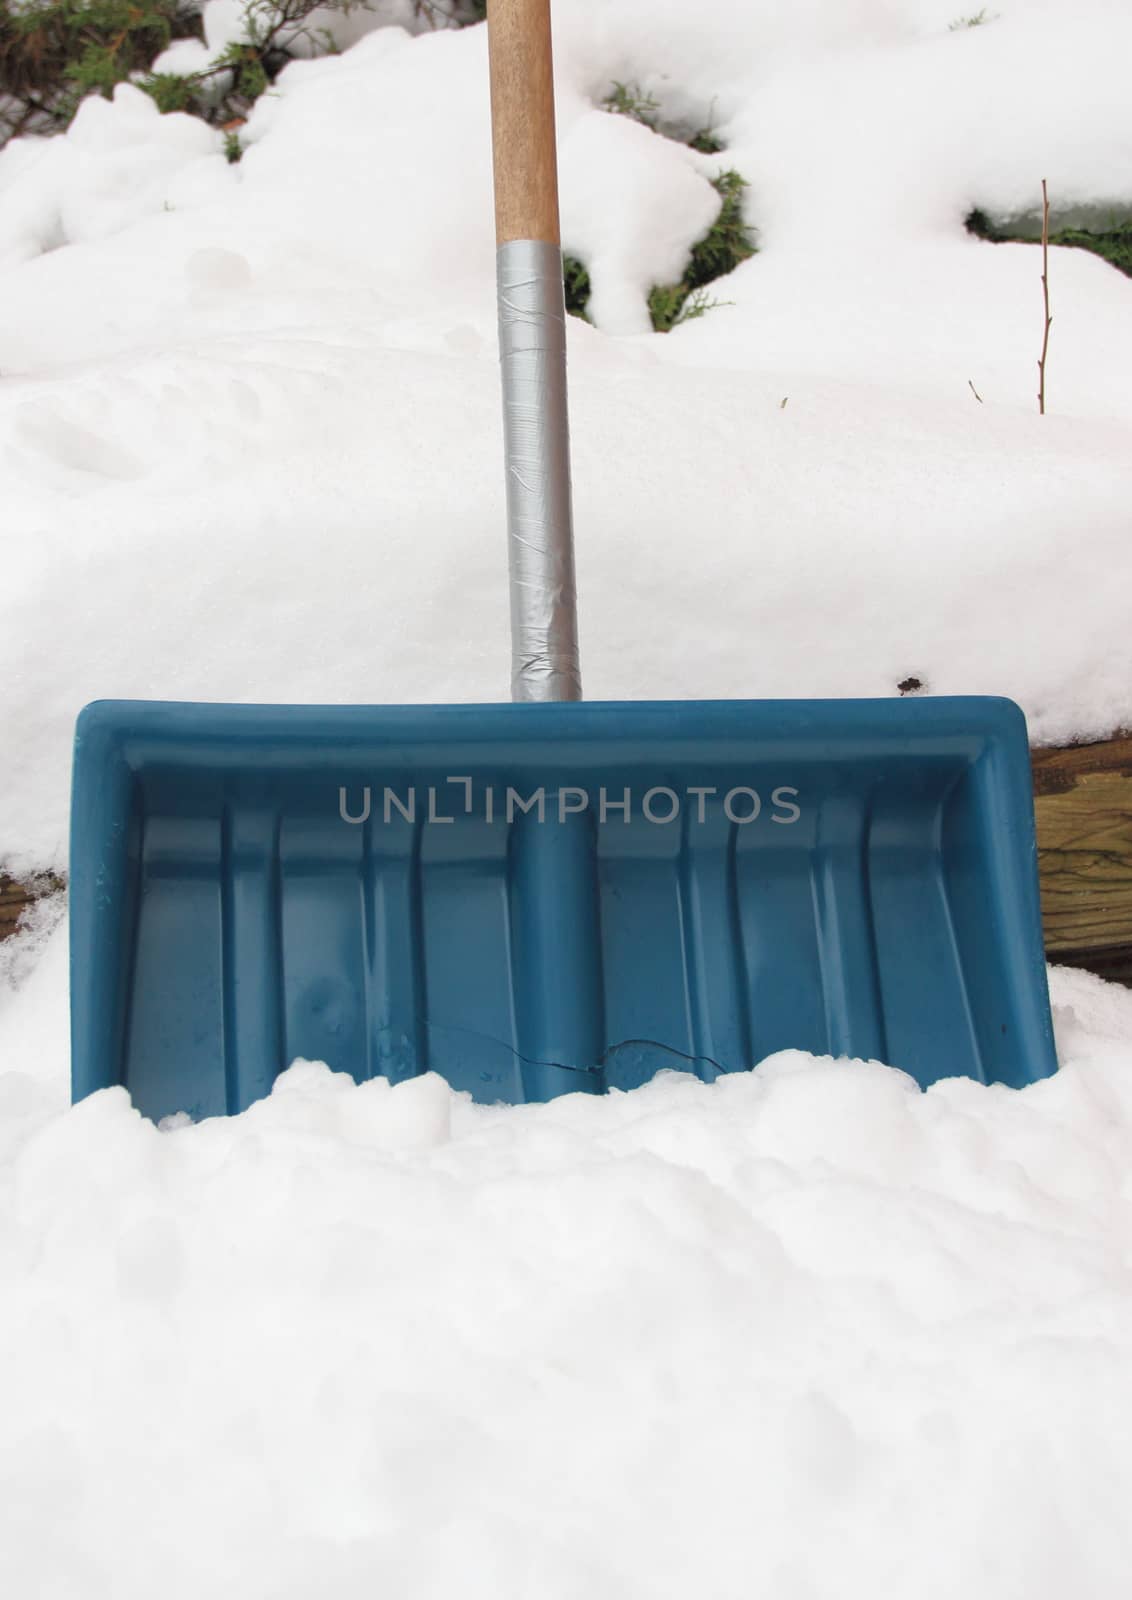 Worn snow shovel repaired with tape around handle